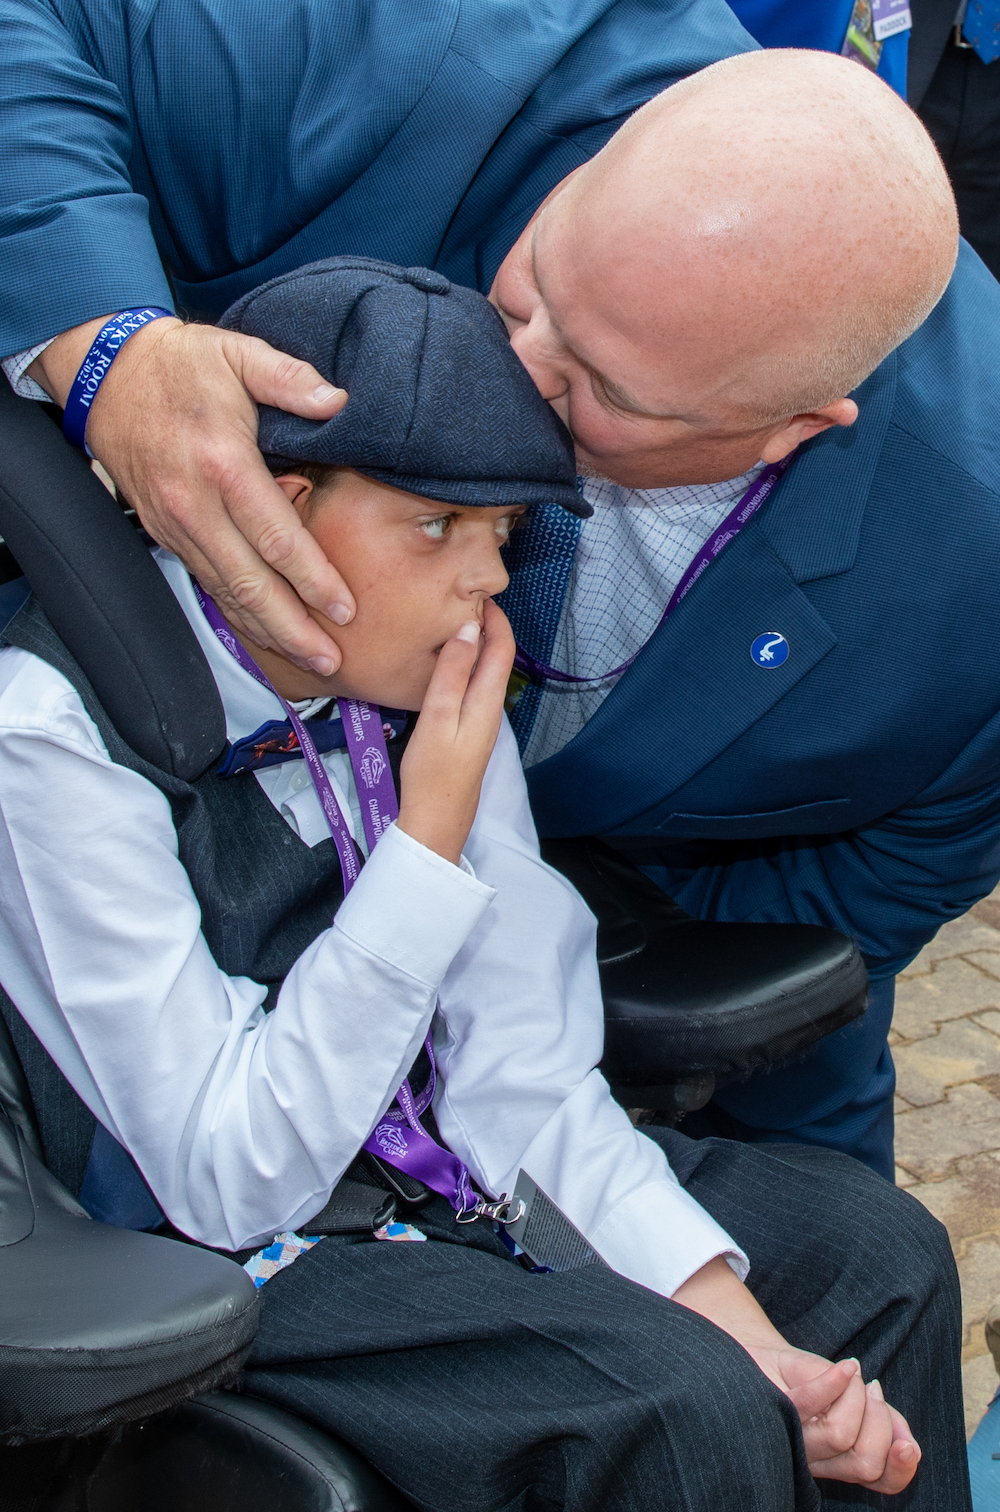 A kiss from pop: Cody Dorman and father Kelly after Cody’s Wish won the Breeders’ Cup Dirt Mile at Keeneland. Photo: Bill Denver/Eclipse Sportswire/Breeders’ Cup